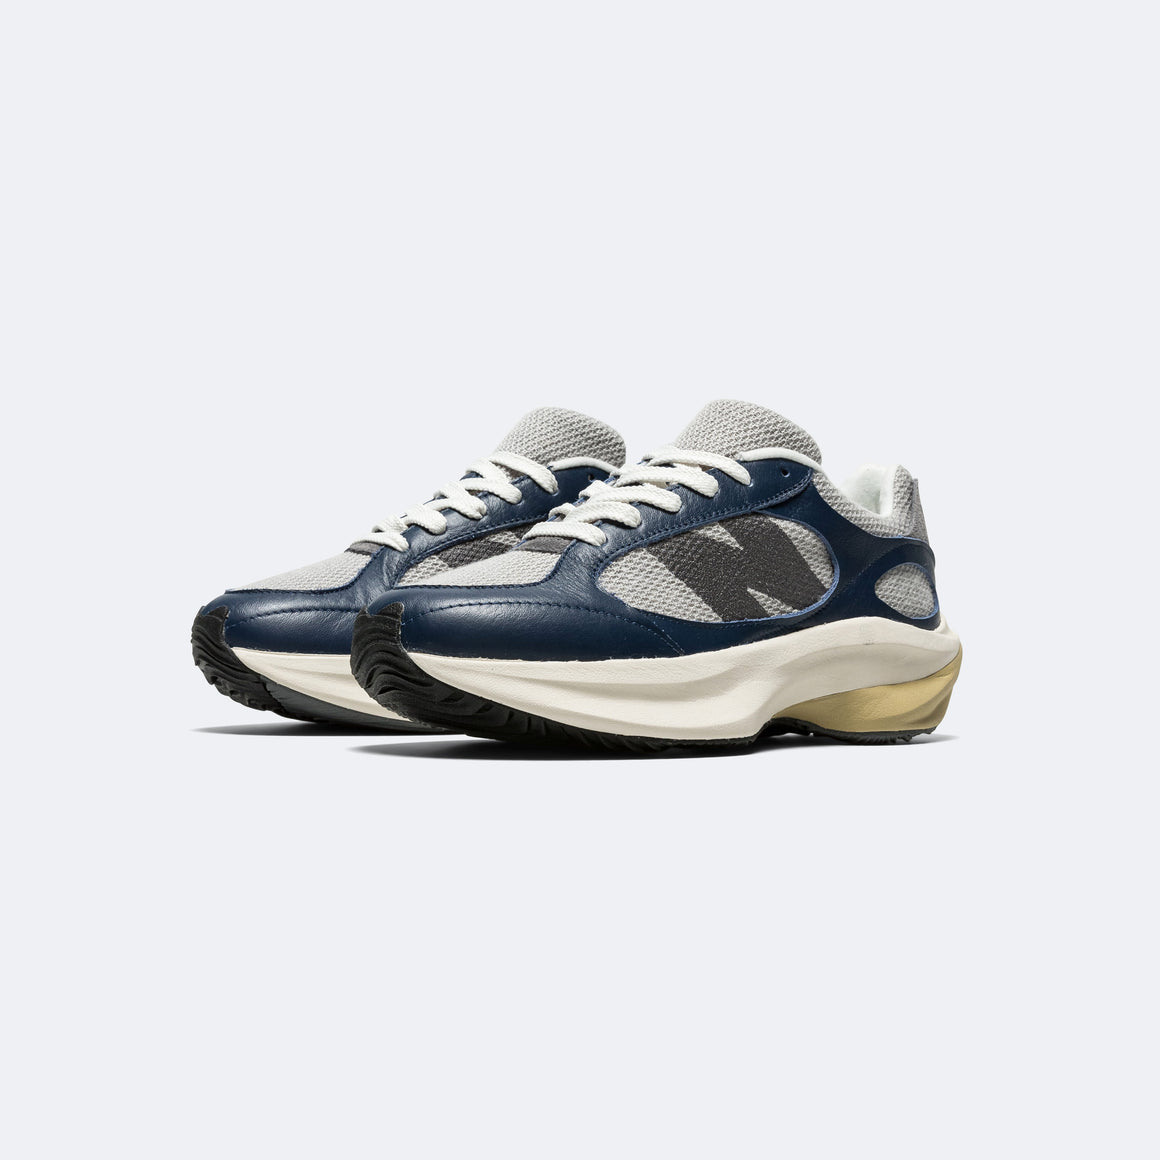 WRPD RUNNER 'Leather Pack' - Navy